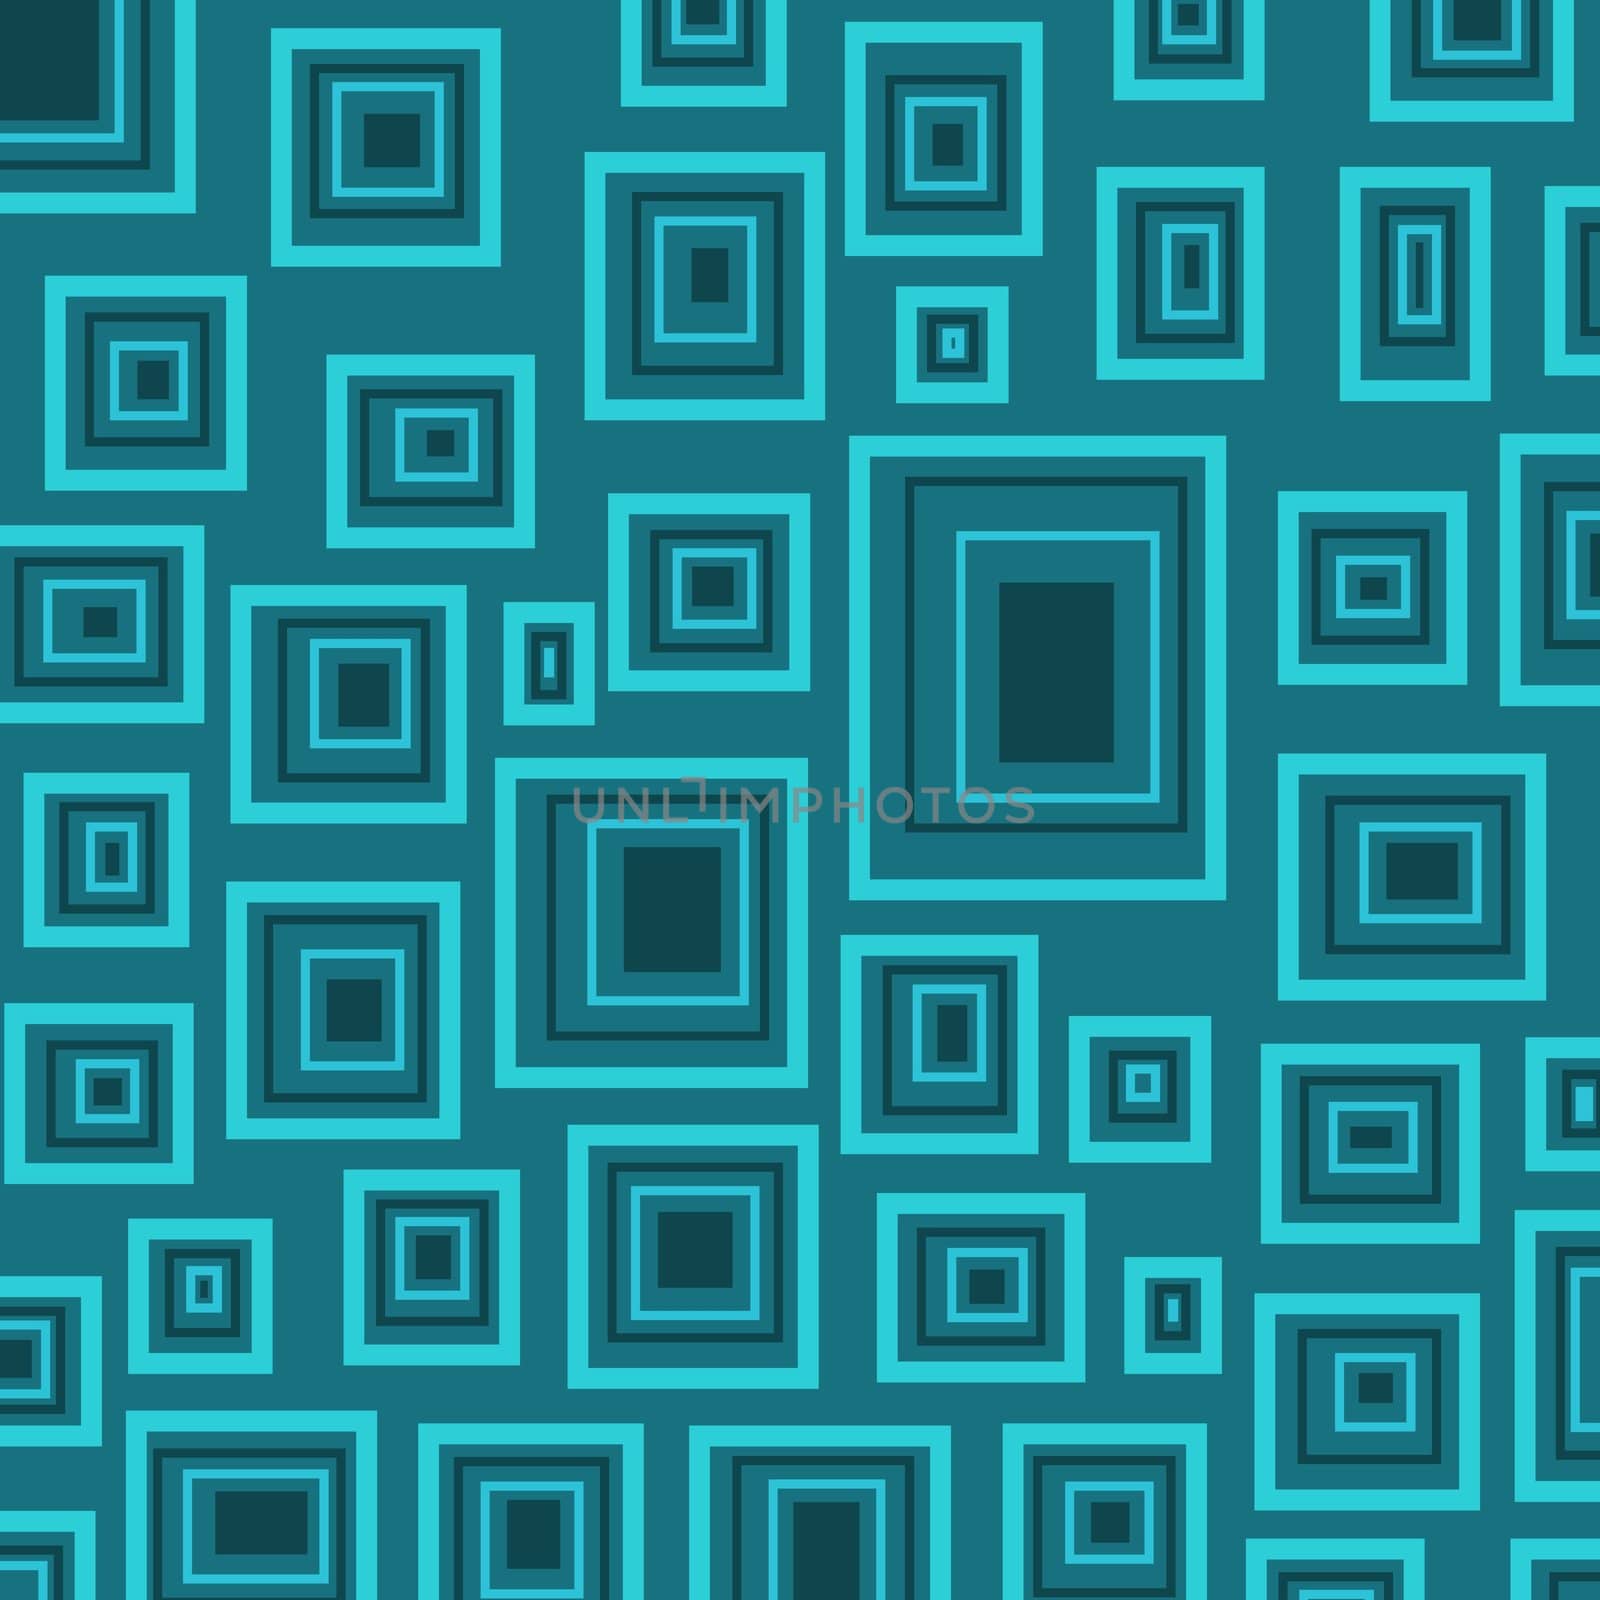 Abstract illustration of blue squares over a blue background